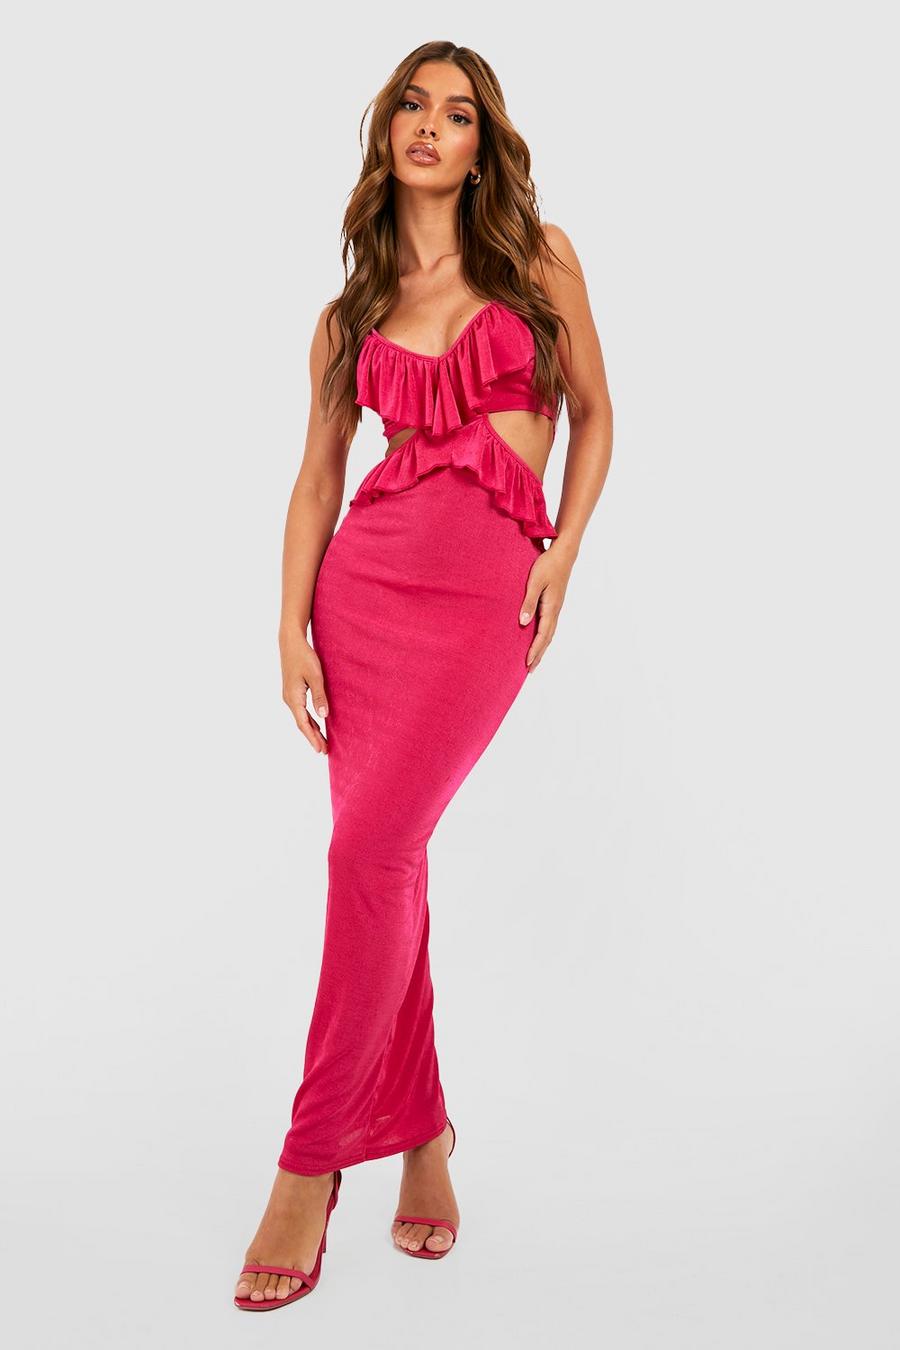 Cerise Textured Slinky Ruffle Cut Out Midaxi Dress image number 1